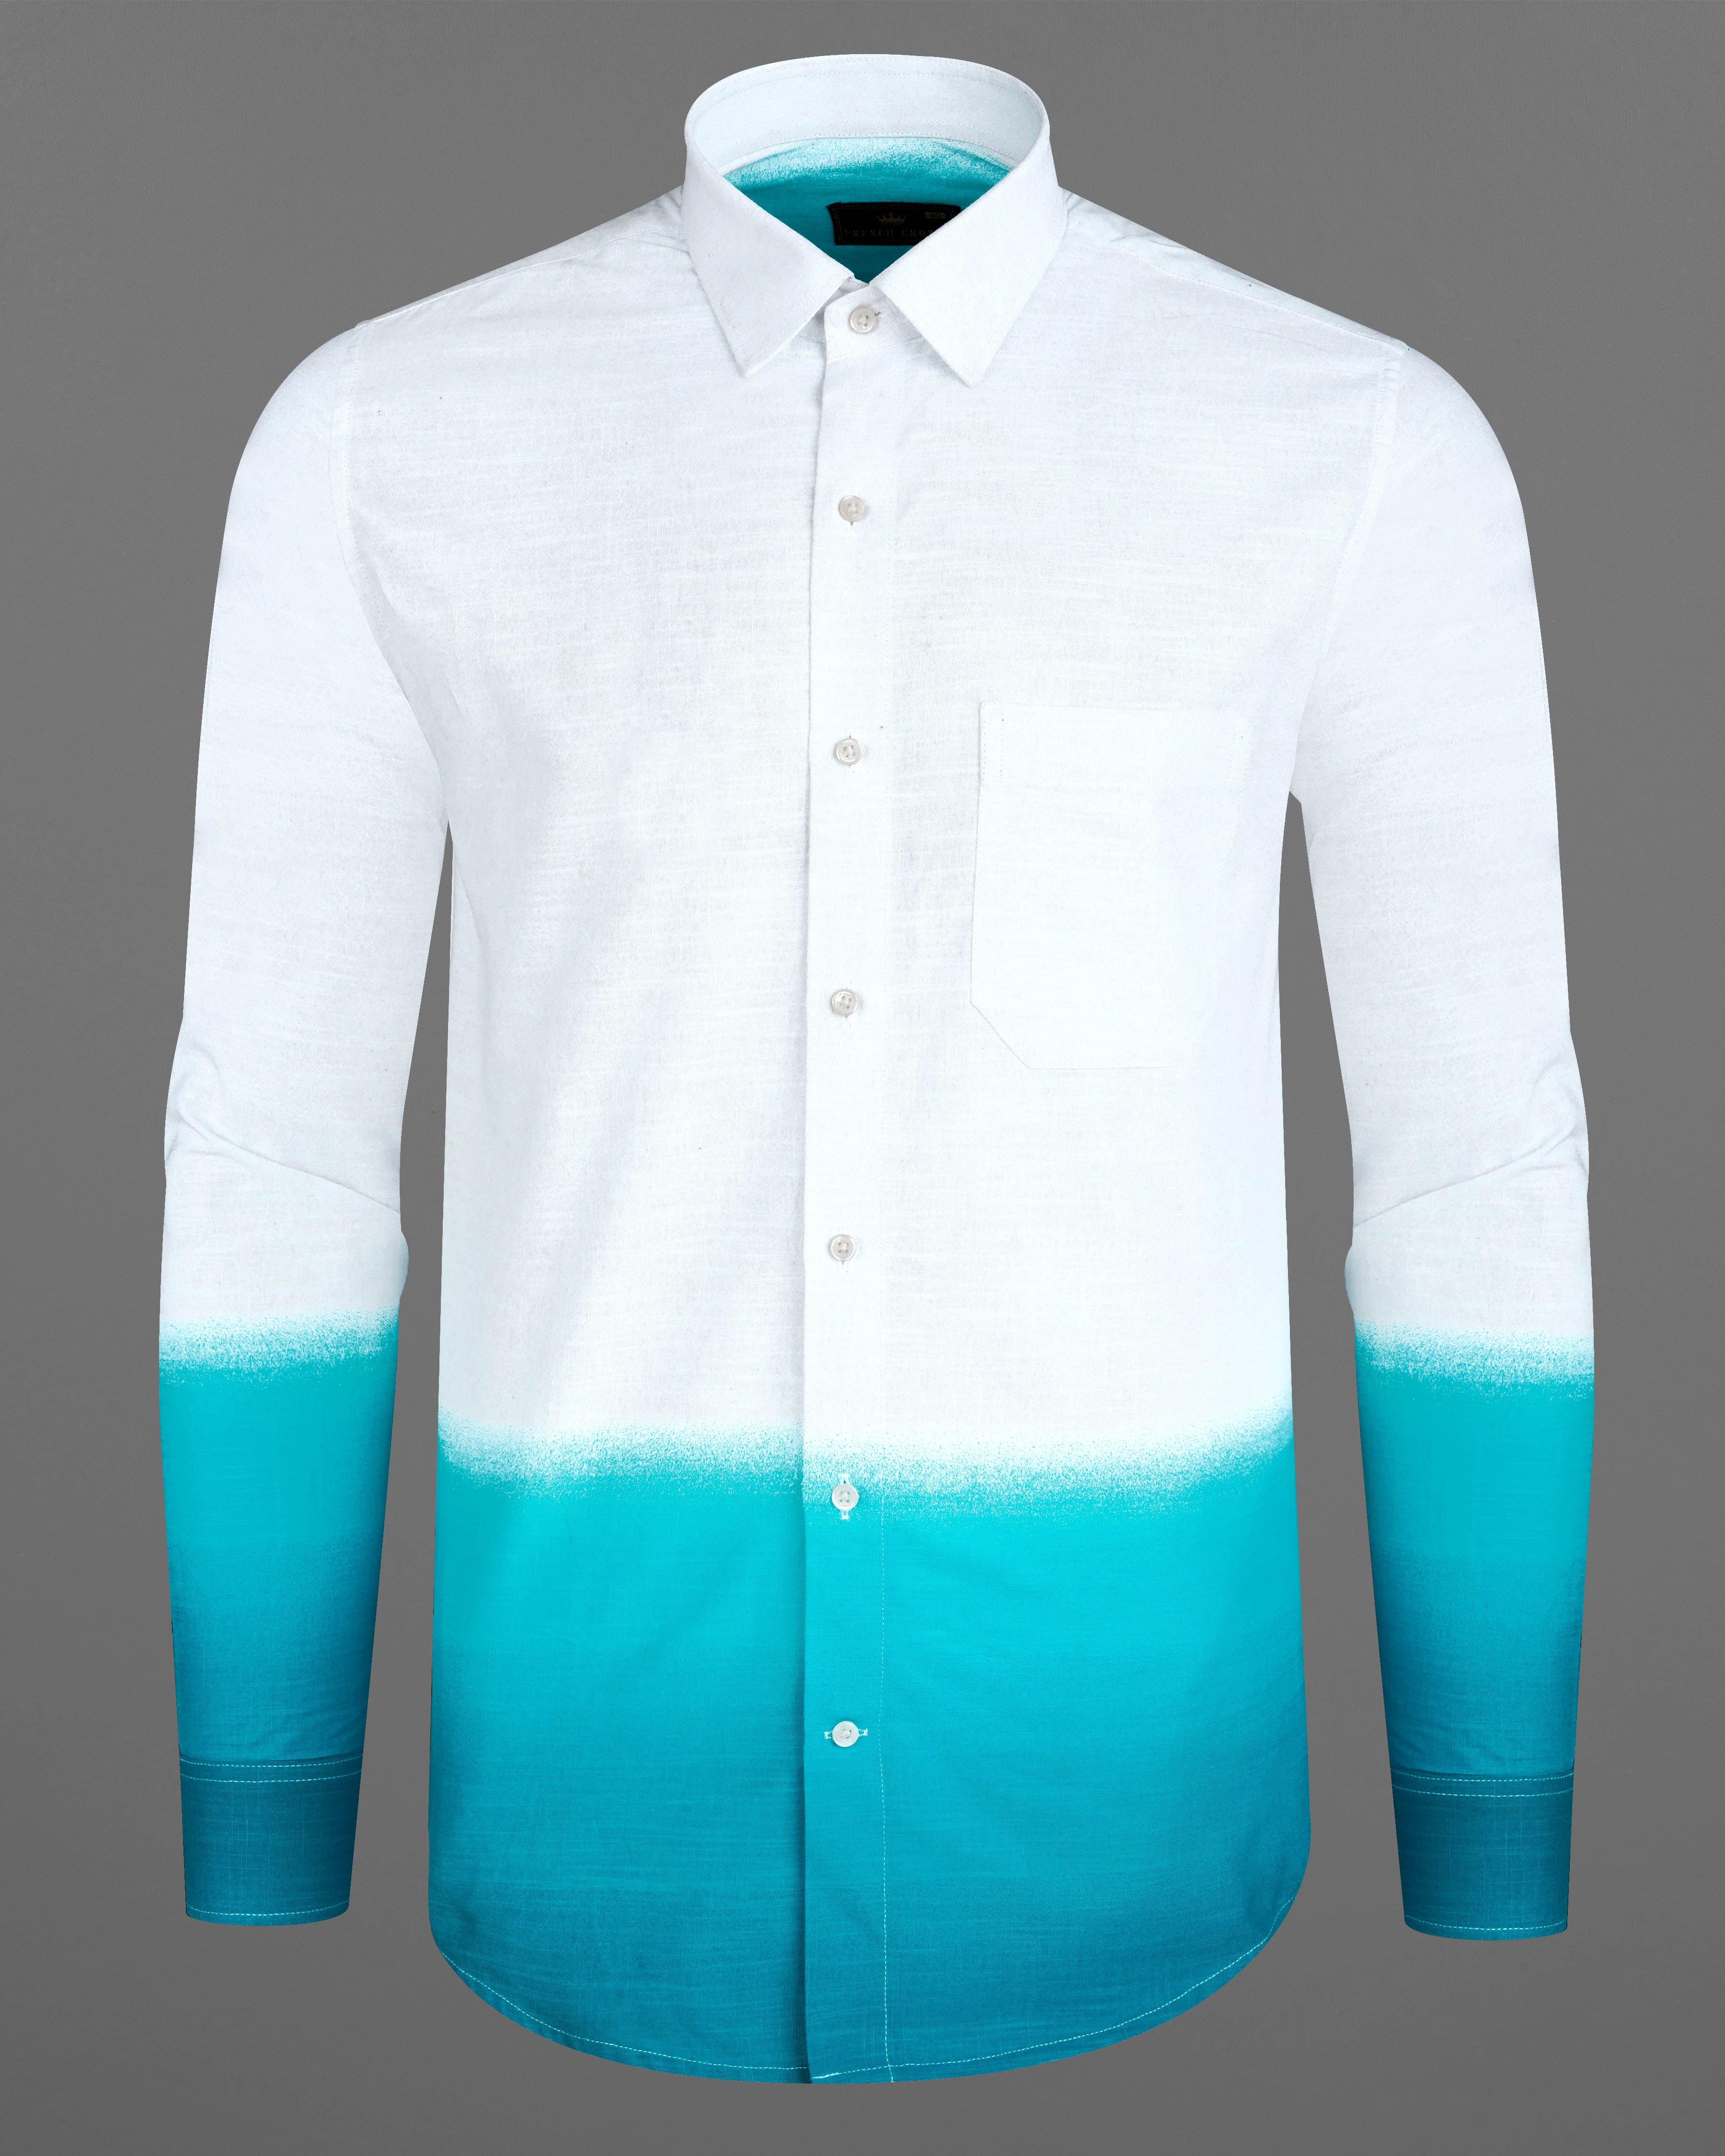 Bright White and Dark Turquoise Blue Chambray Textured Premium Cotton 8186-38, 8186-H-38, 8186-39, 8186-H-39, 8186-40, 8186-H-40, 8186-42, 8186-H-42, 8186-44, 8186-H-44, 8186-46, 8186-H-46, 8186-48, 8186-H-48, 8186-50, 8186-H-50, 8186-52, 8186-H-52